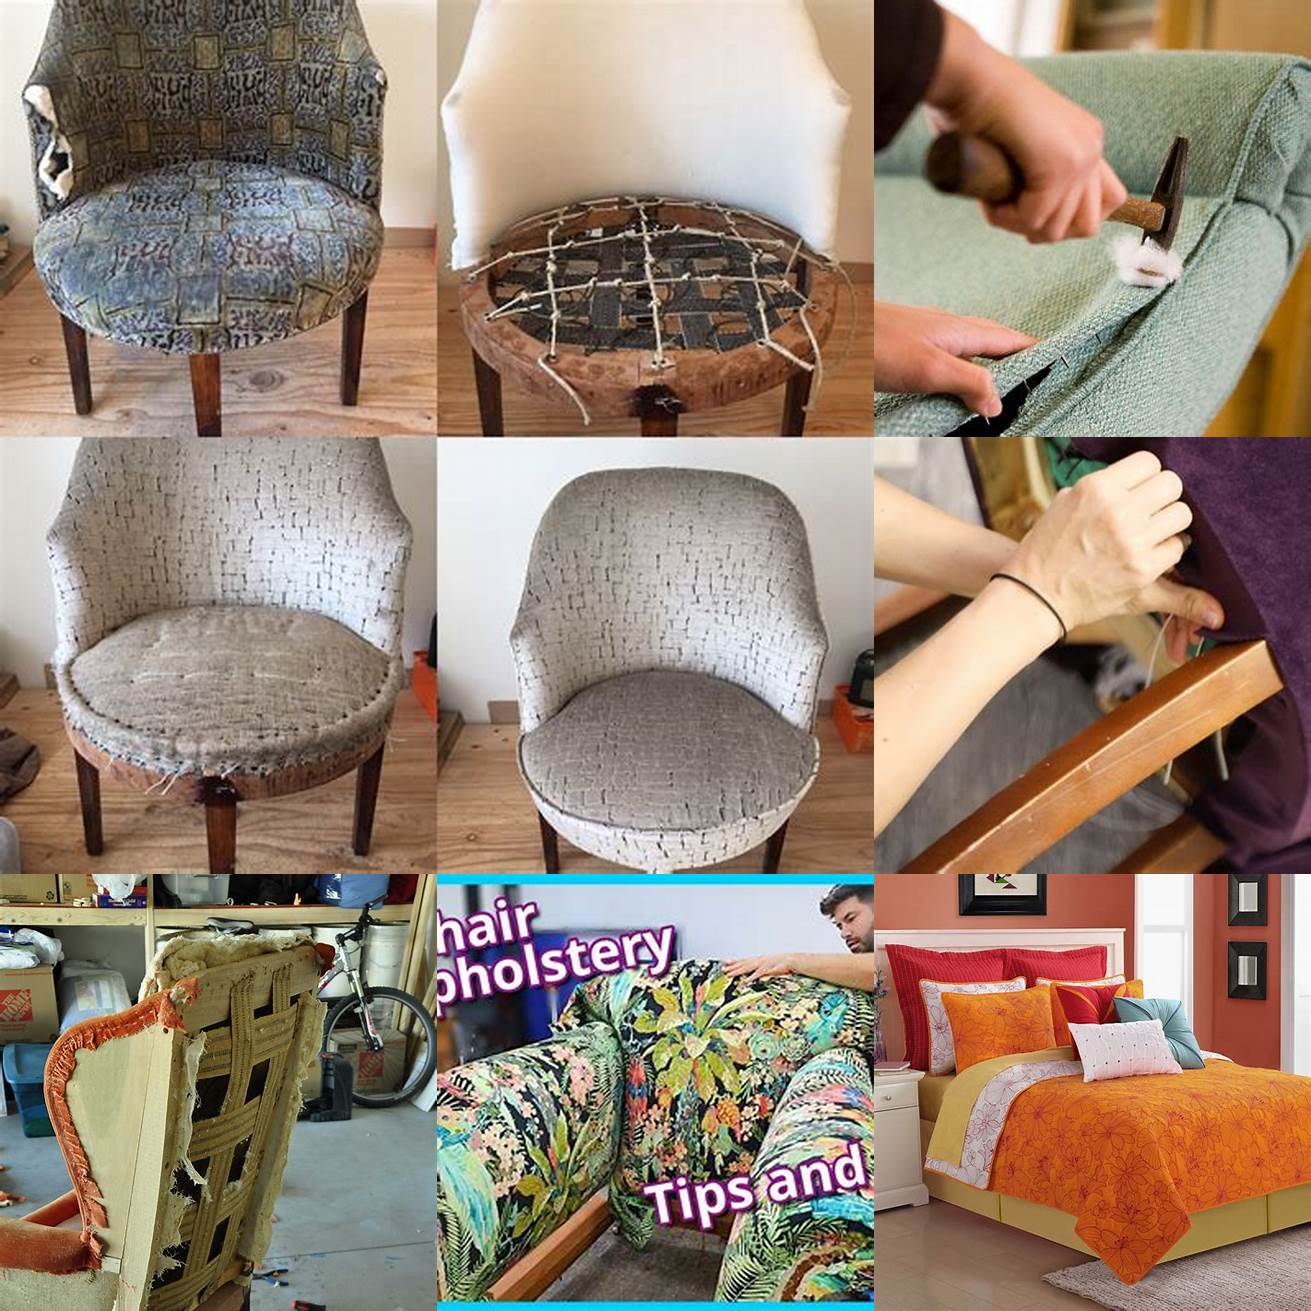 Upholstery techniques